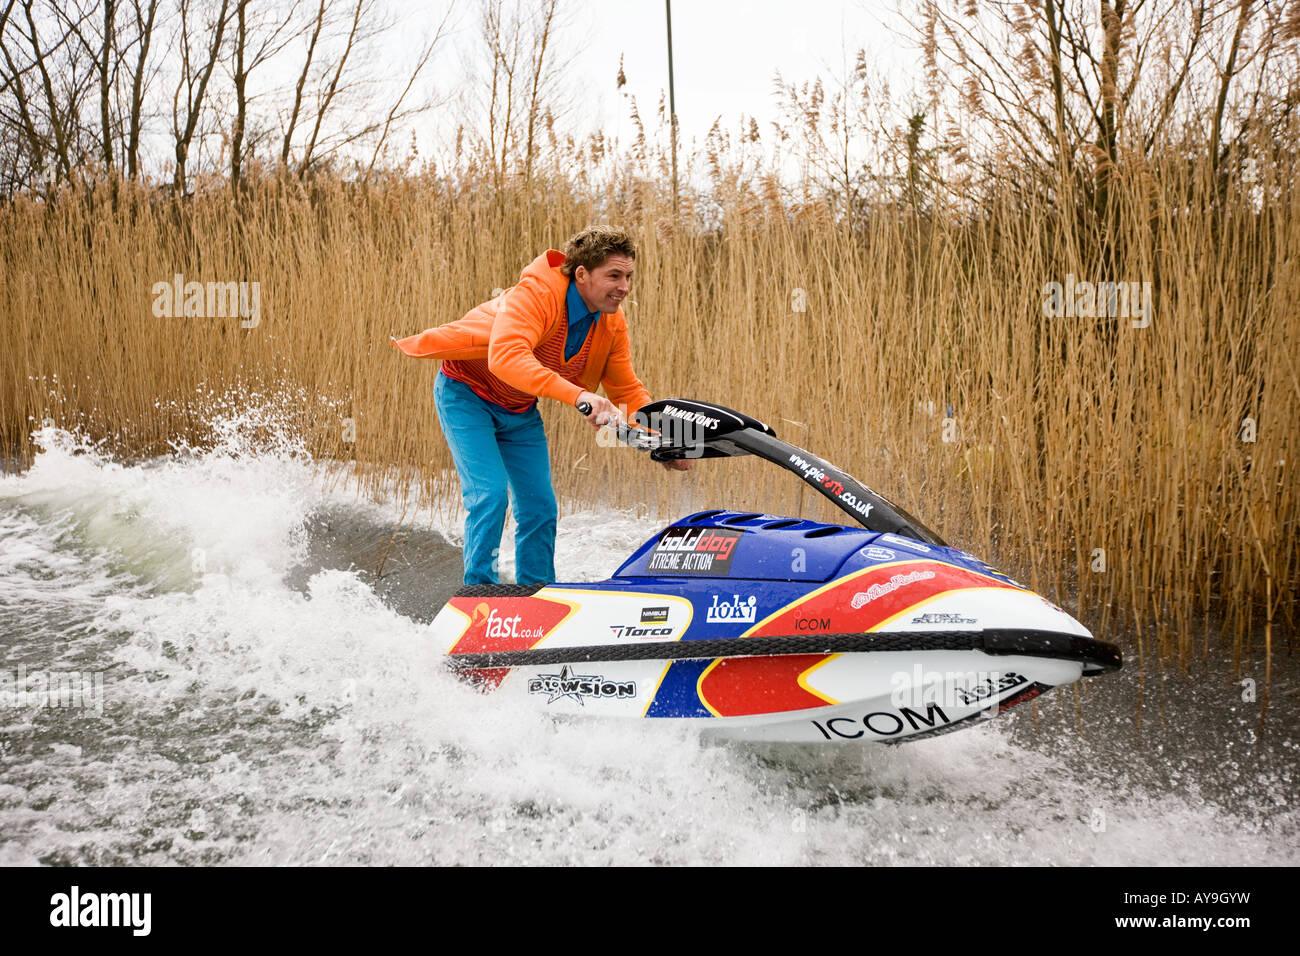 Paul Martin jet skiing with speed and concentration Stock Photo